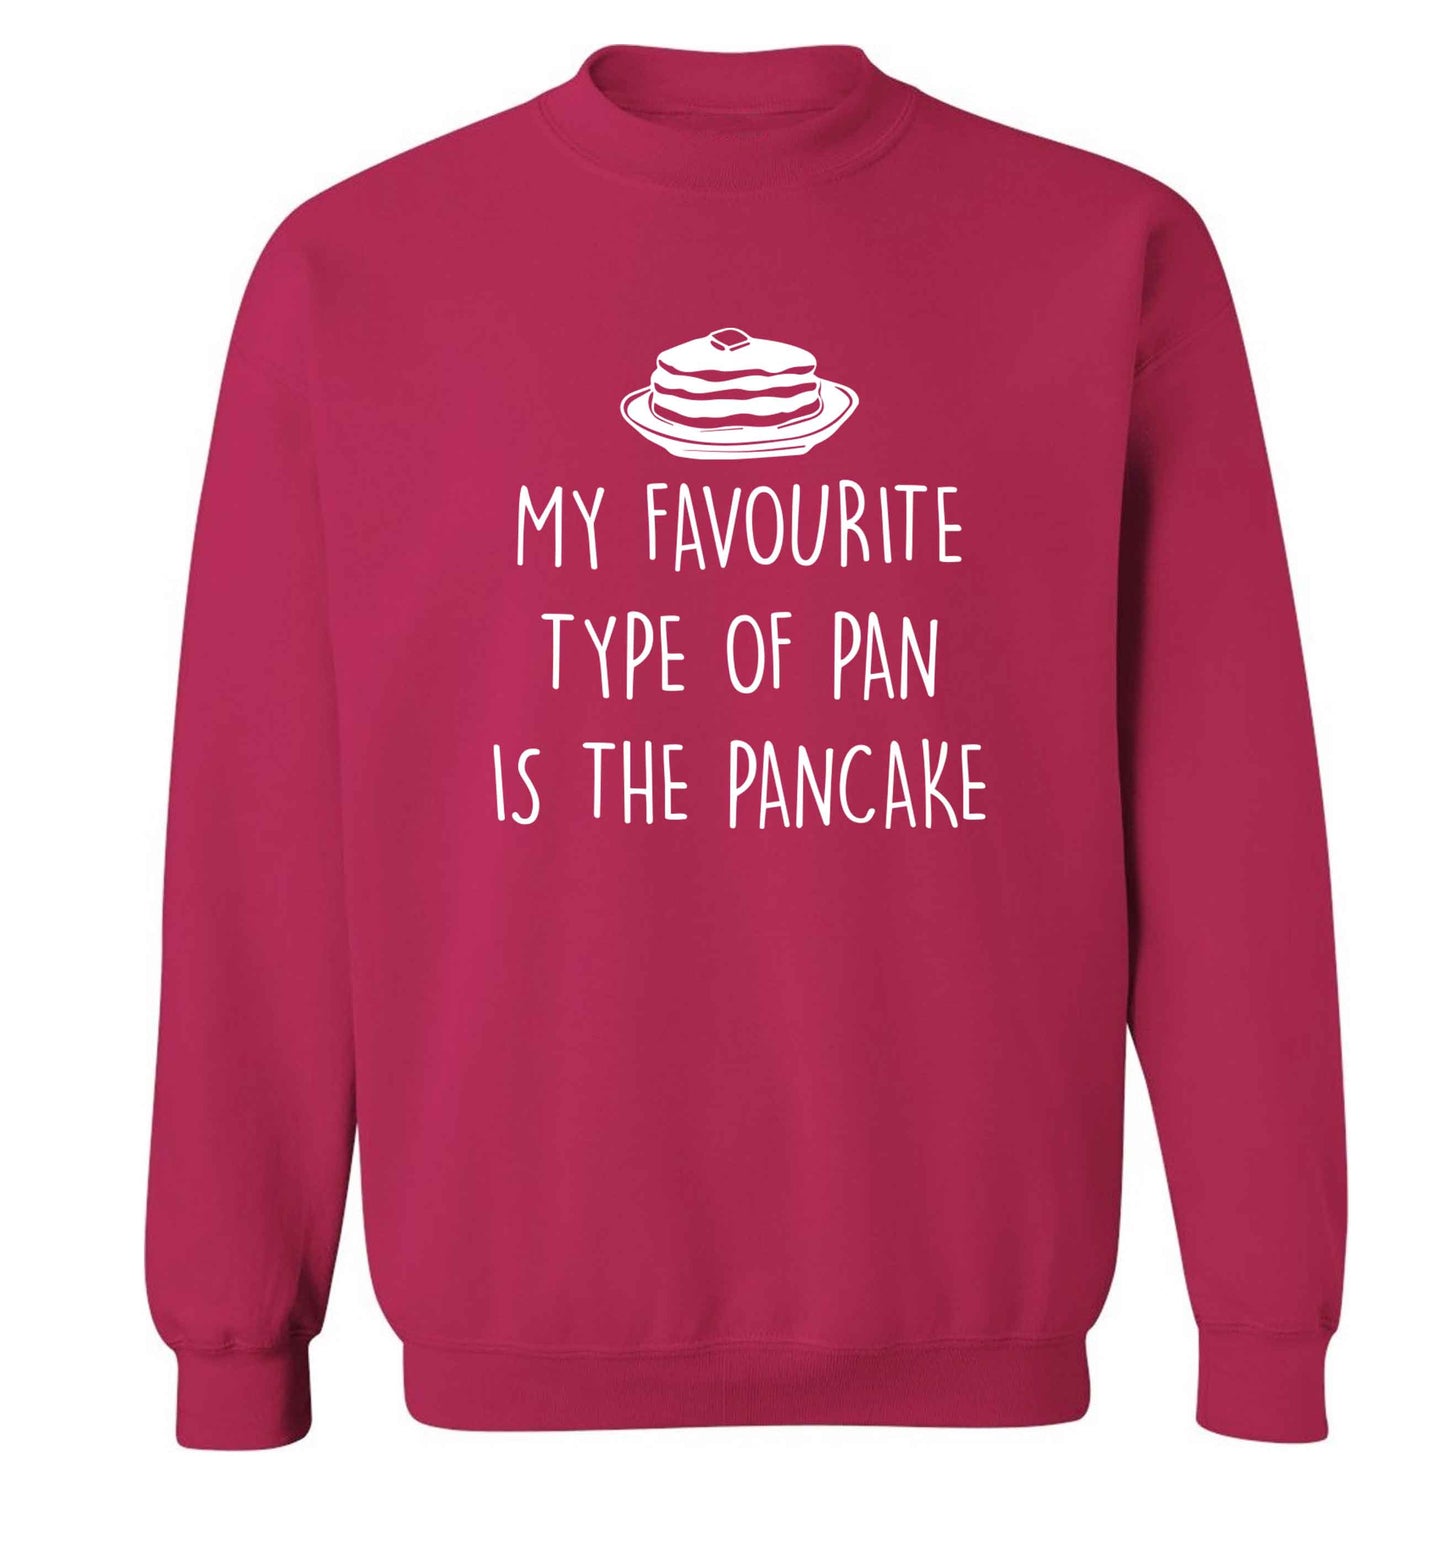 My favourite type of pan is the pancake adult's unisex pink sweater 2XL